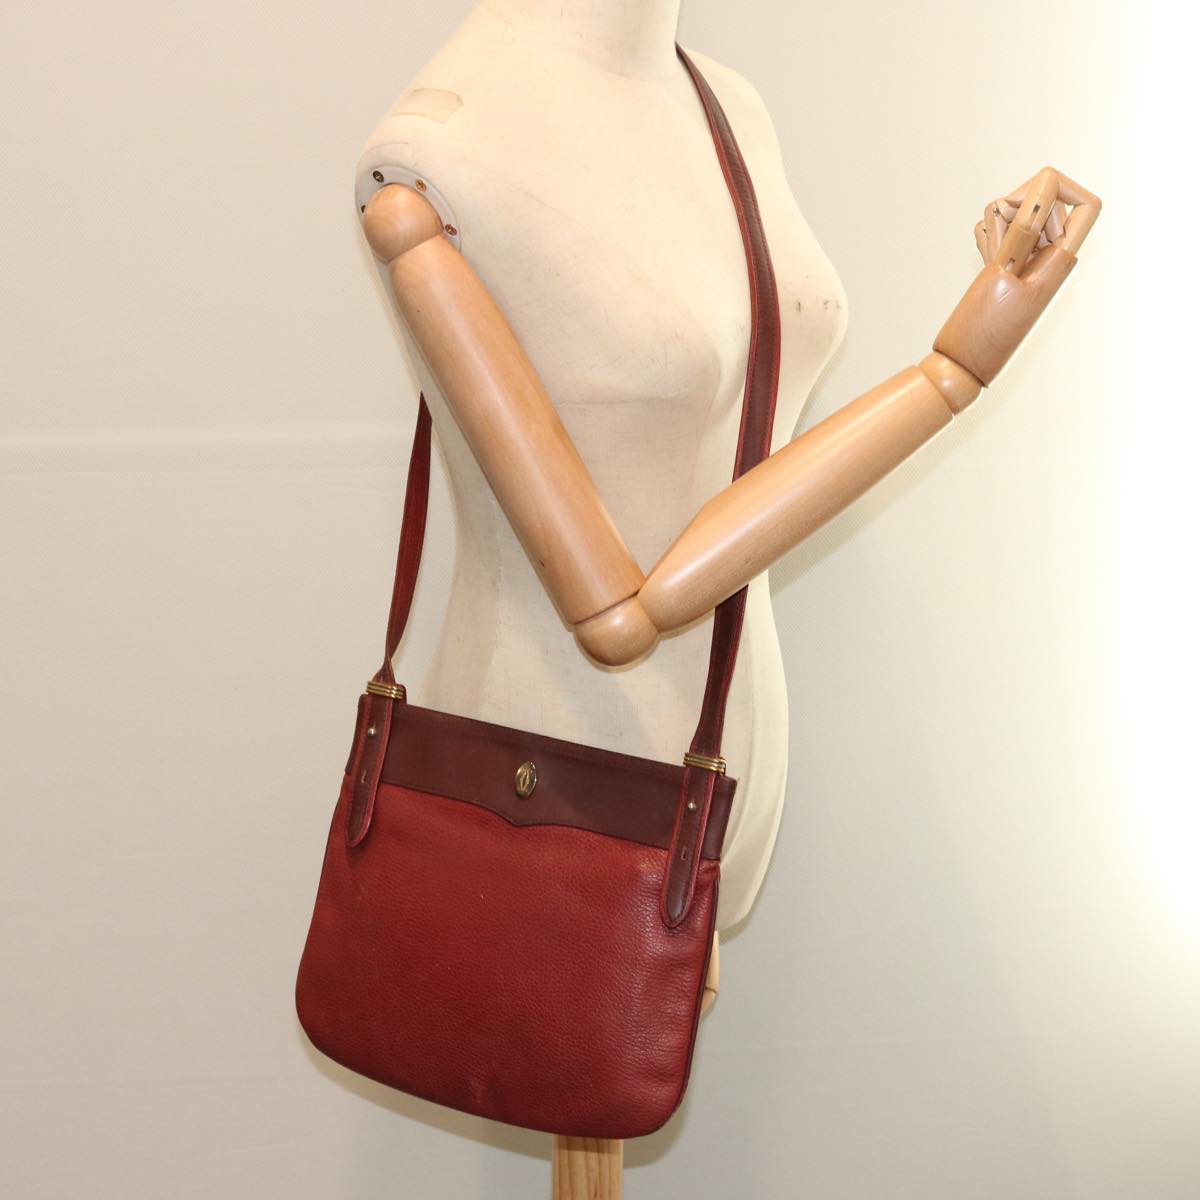 CARTIER Shoulder Bag Leather Red Auth yk11388